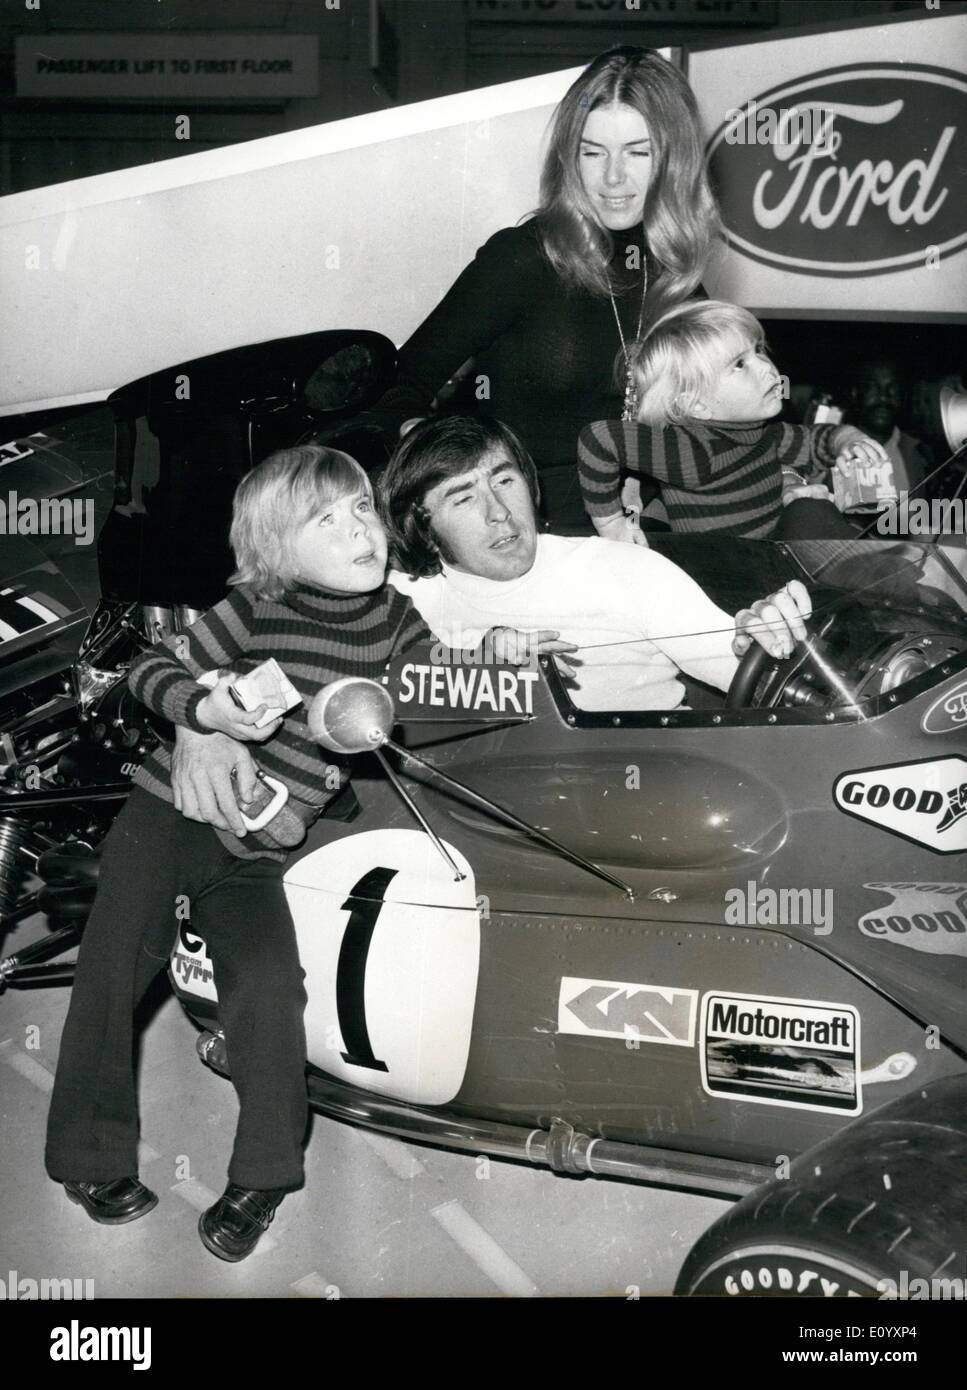 Oct. 10, 1971 - Opening of the Motor Show; The 1971 Motor Show was opened today at Earls Court by Princess Alexandra. Photo Shows Jackie Stewart, the world champion racing driver, with his wife Helen and sons Paul (eldest0 and Mark, pictured with his championship winning Tyrrell Ford car at the show. Stock Photo